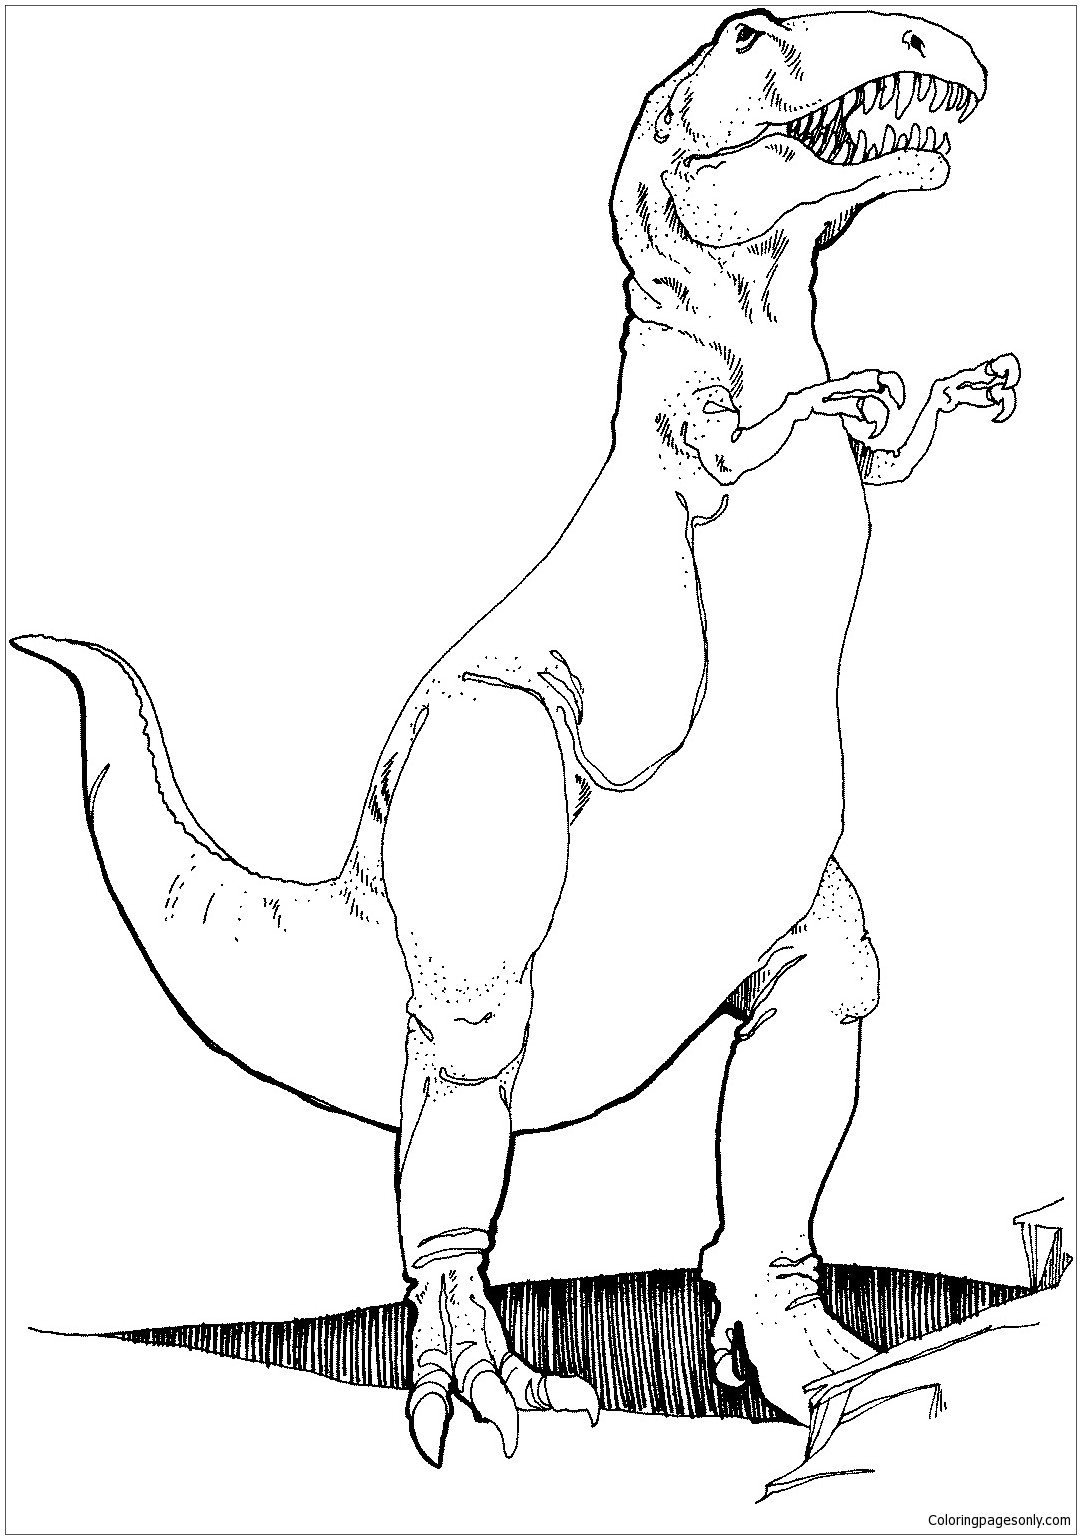 coloring : T Rex Pictures To Color New Tyrannosaurus T Rex Coloring Page  Free Coloring Pages Line T Rex Pictures to Color ~ queens